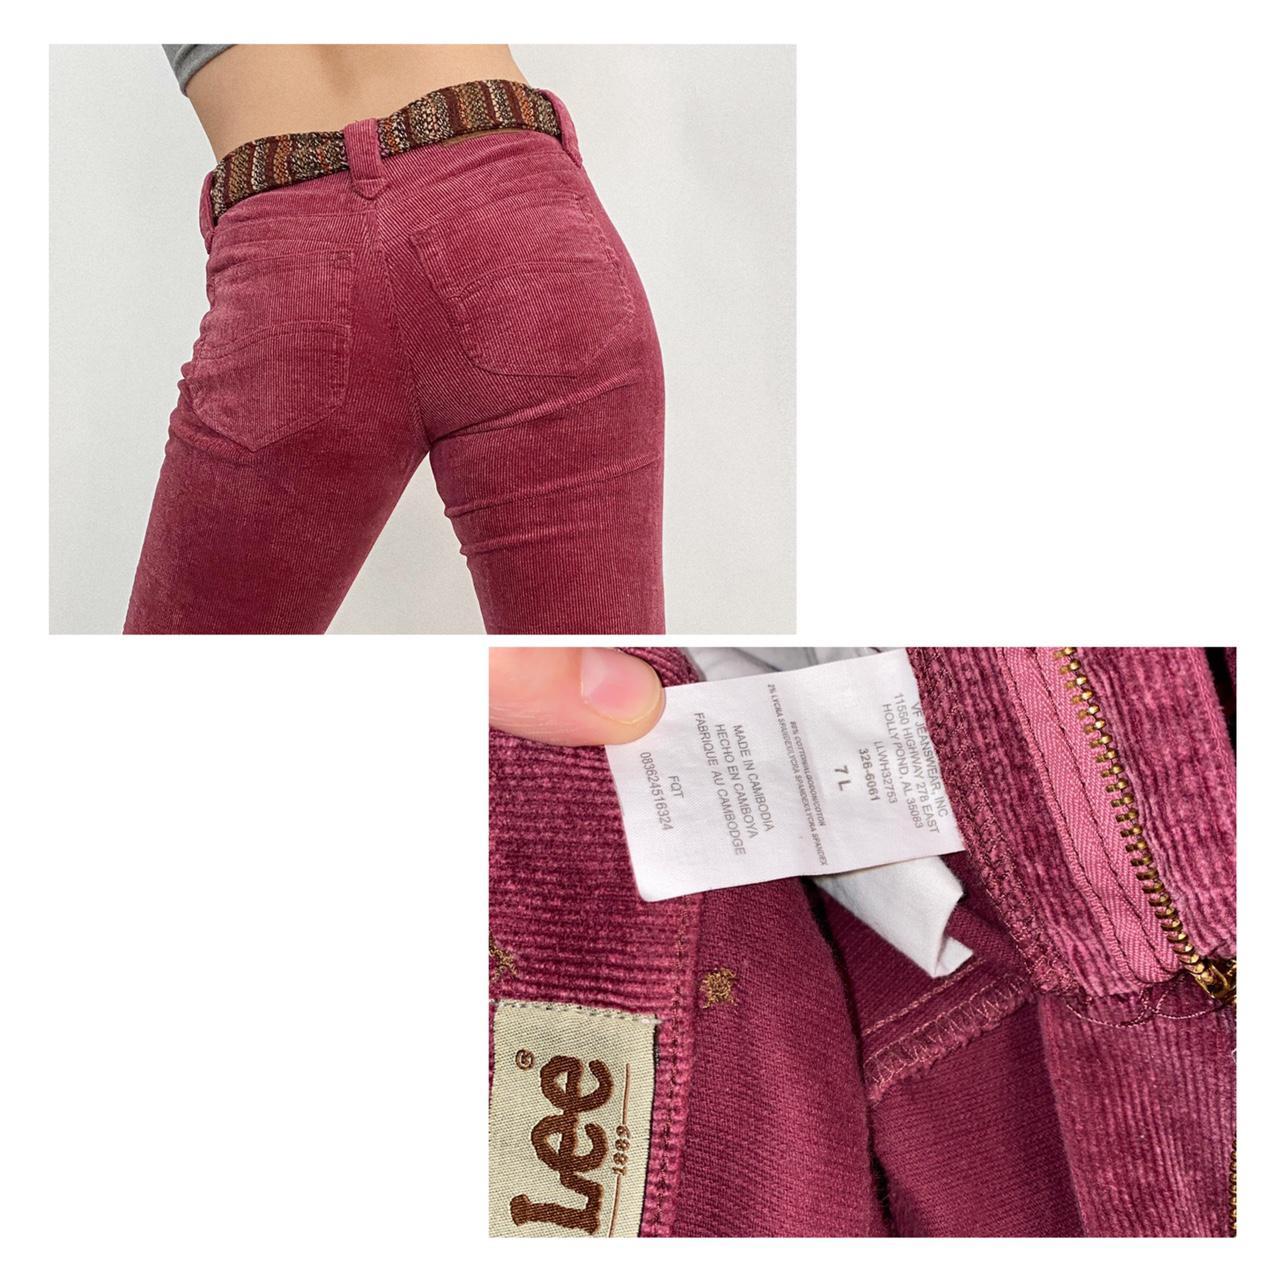 Lee Women's Pink and Burgundy Jeans (4)